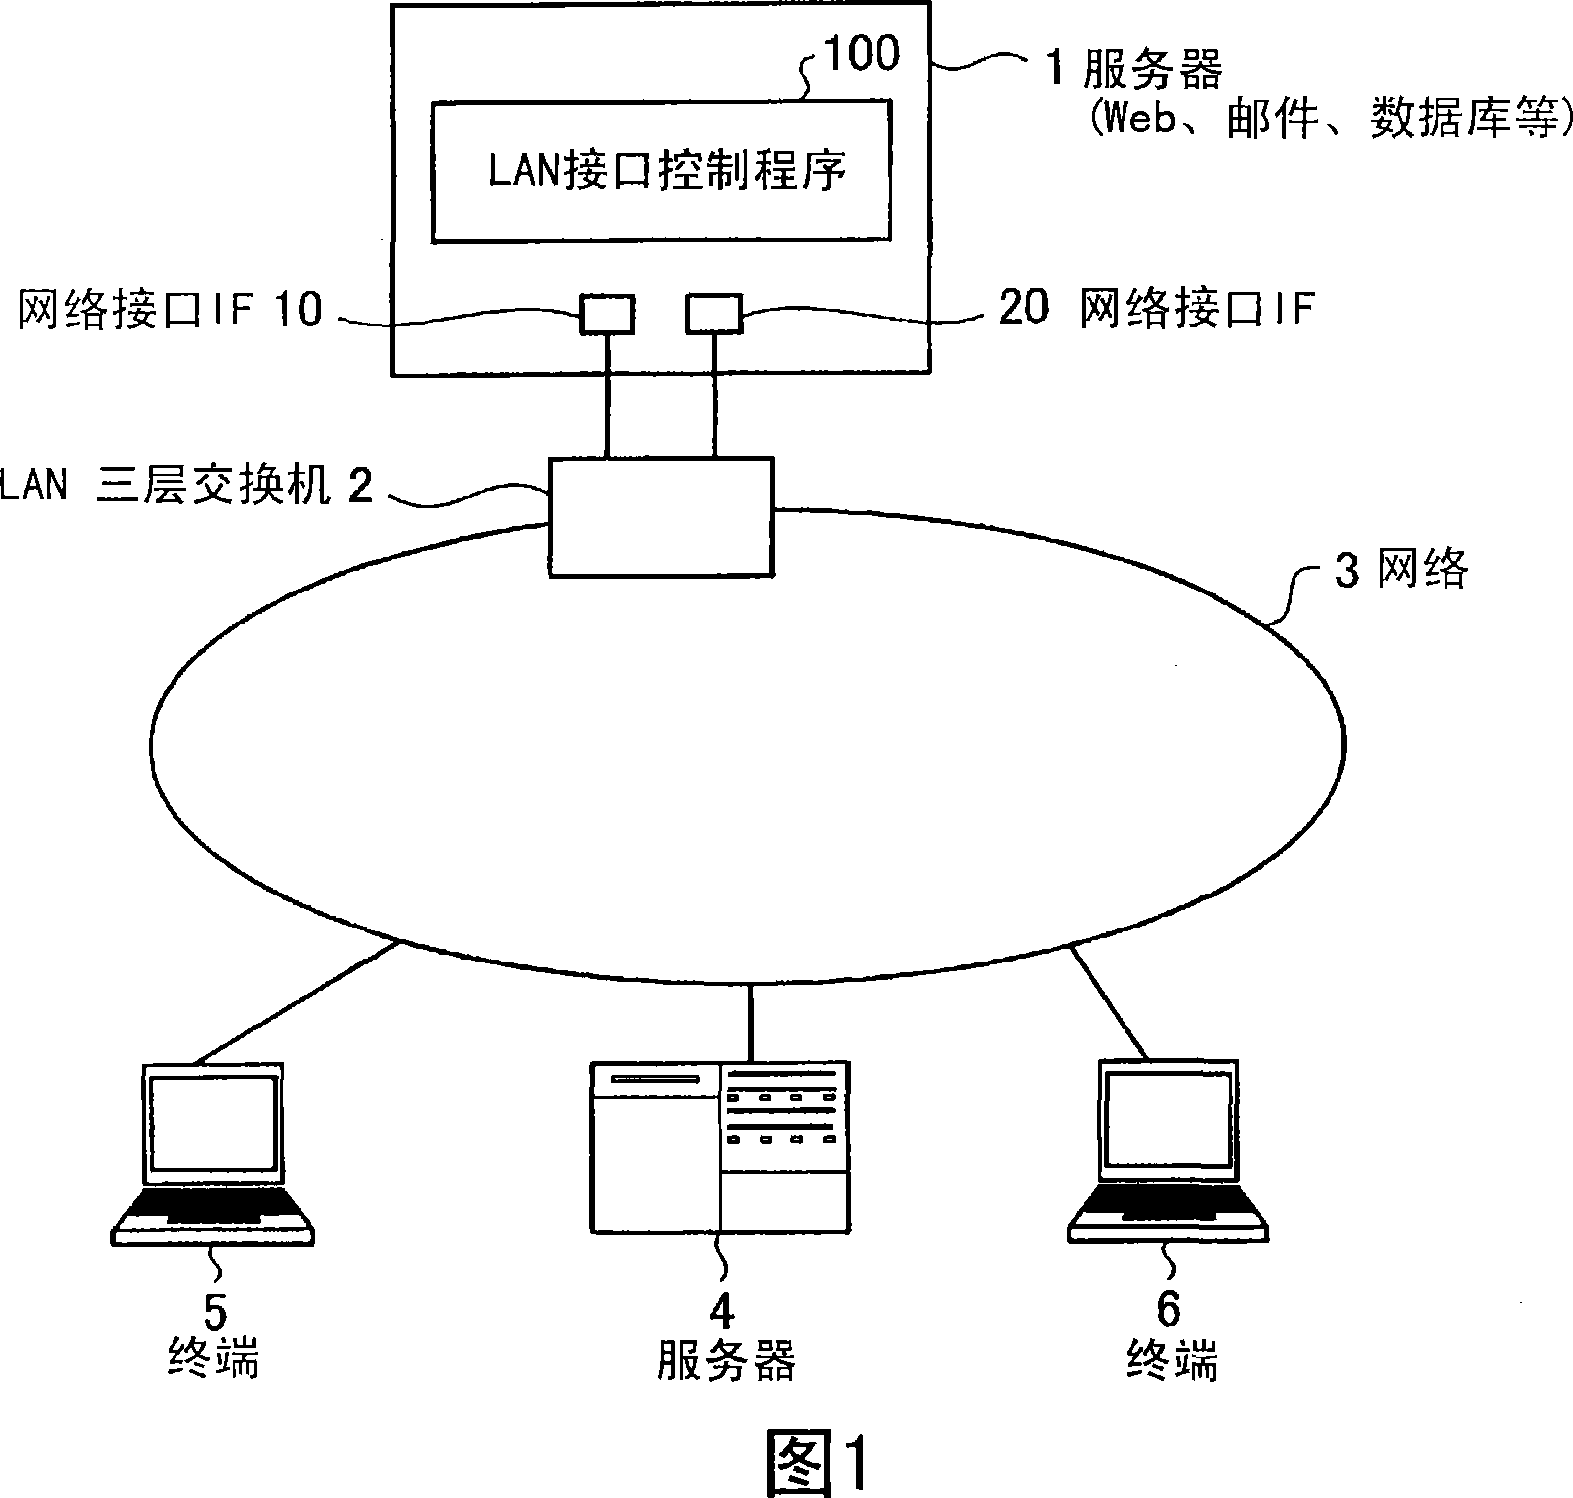 Network interface control program and network interface control device